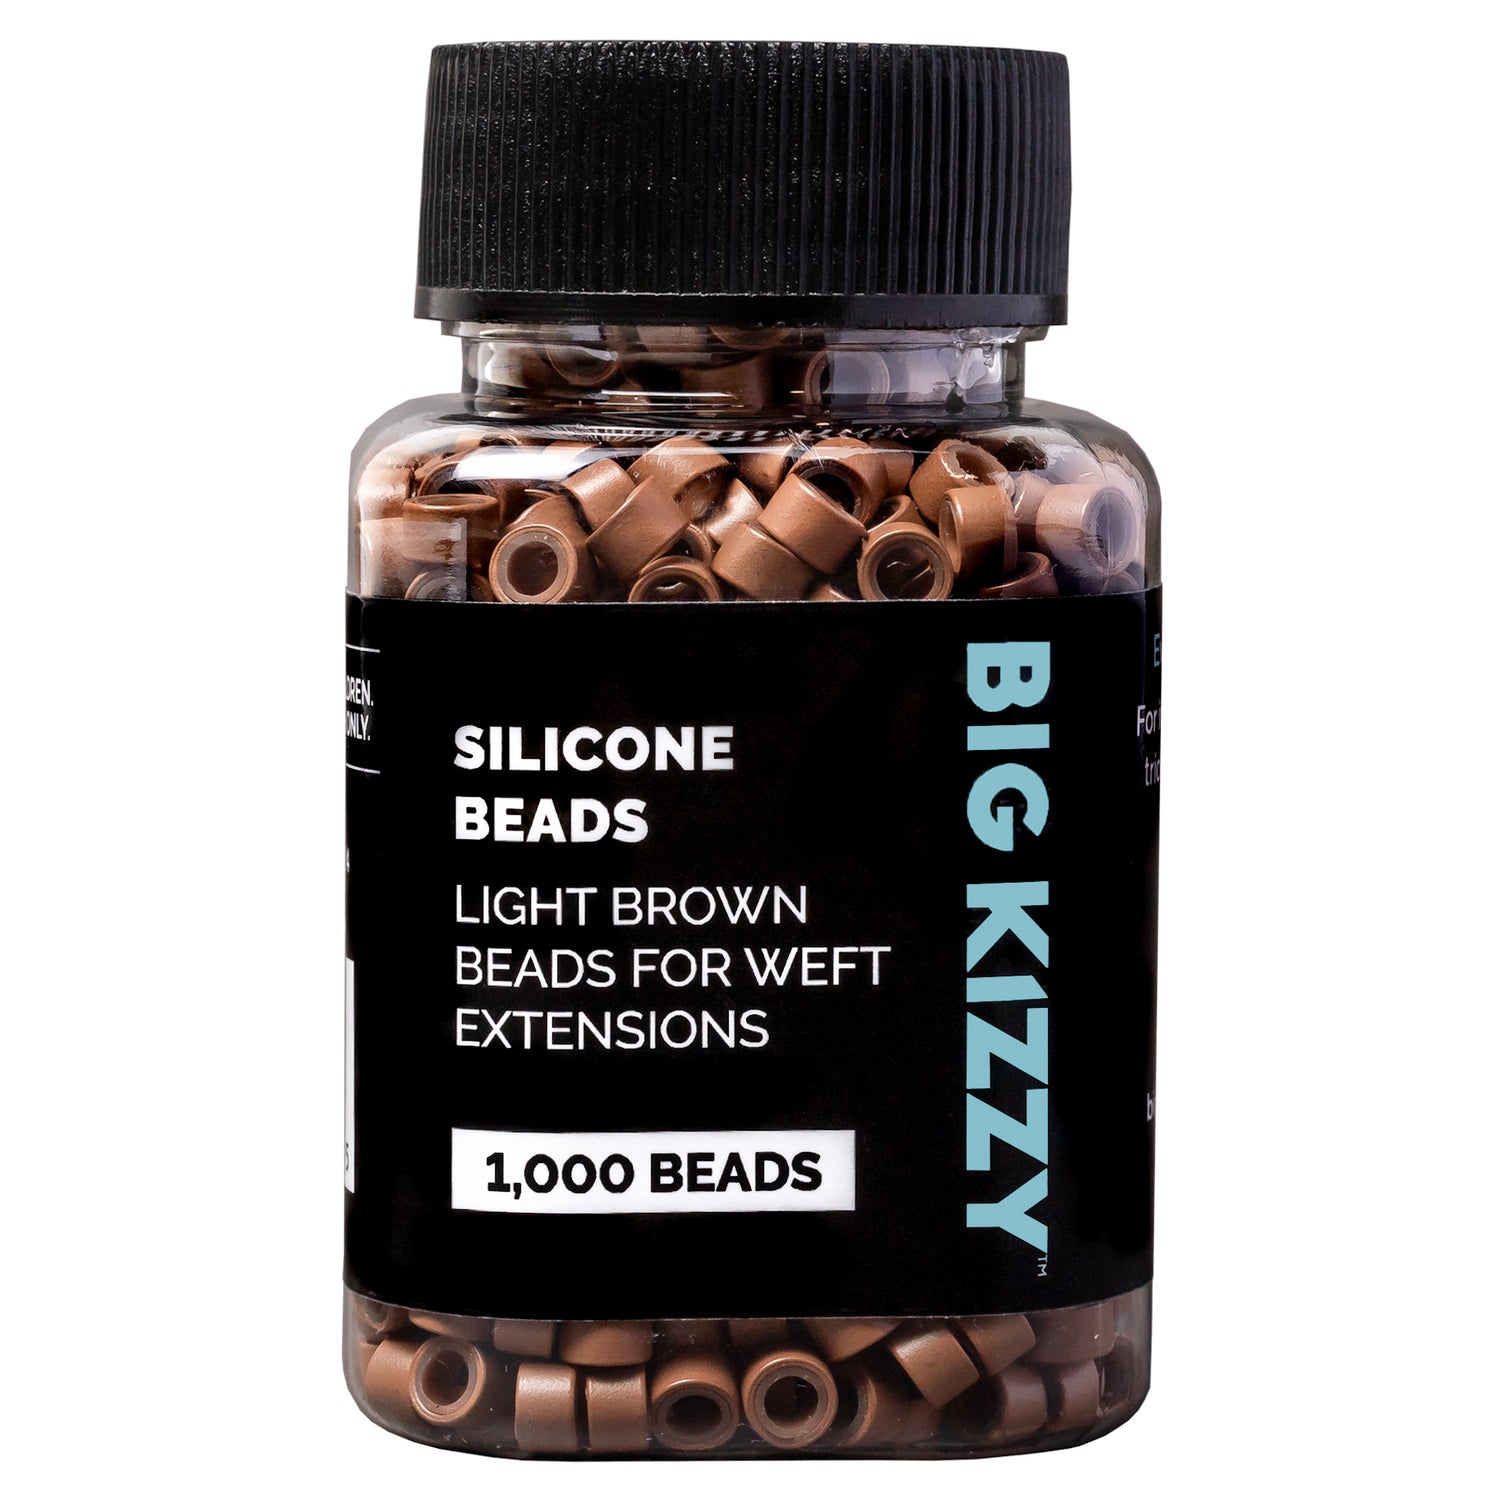 A closed bottle of 1000 Light Brown Beads for Weft Extensions